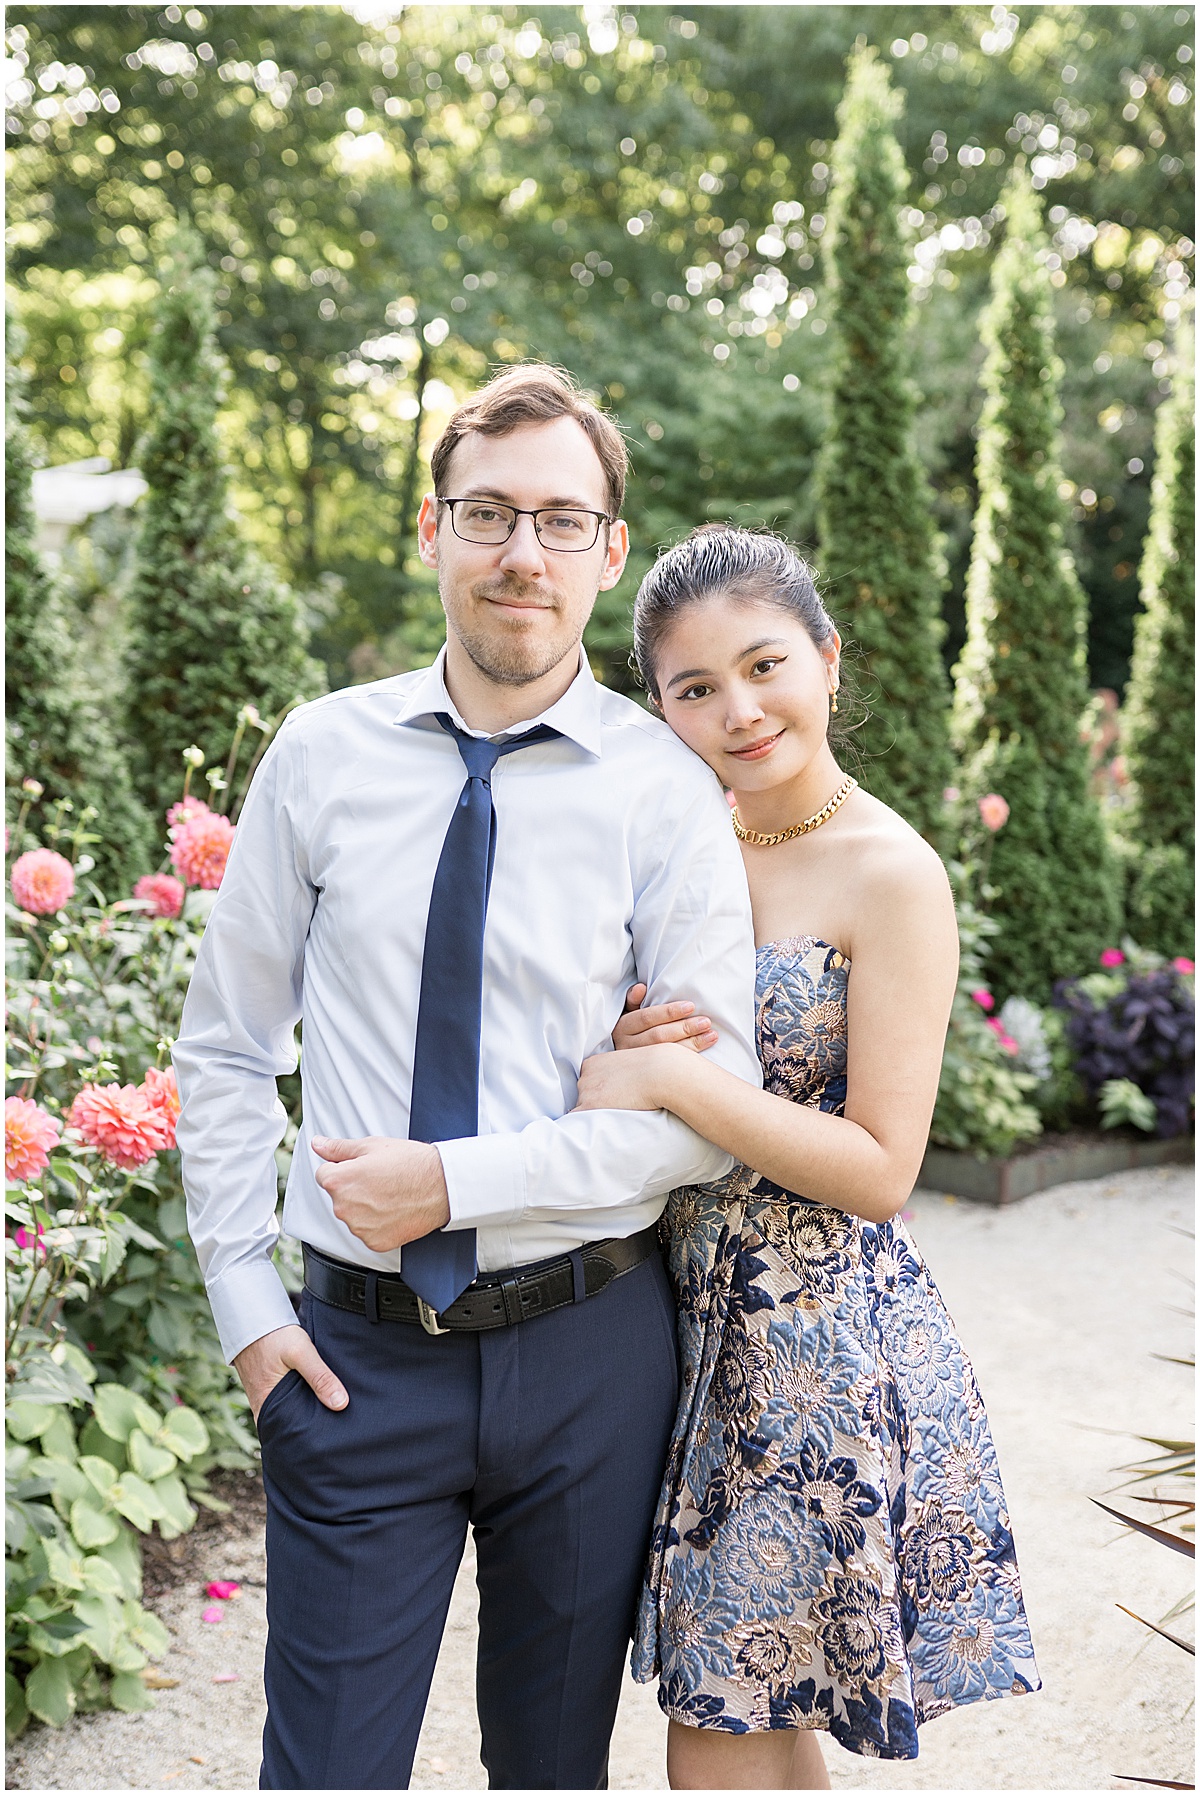 Couple get close on stone path during garden engagement photos at Newfields in Indianapolis